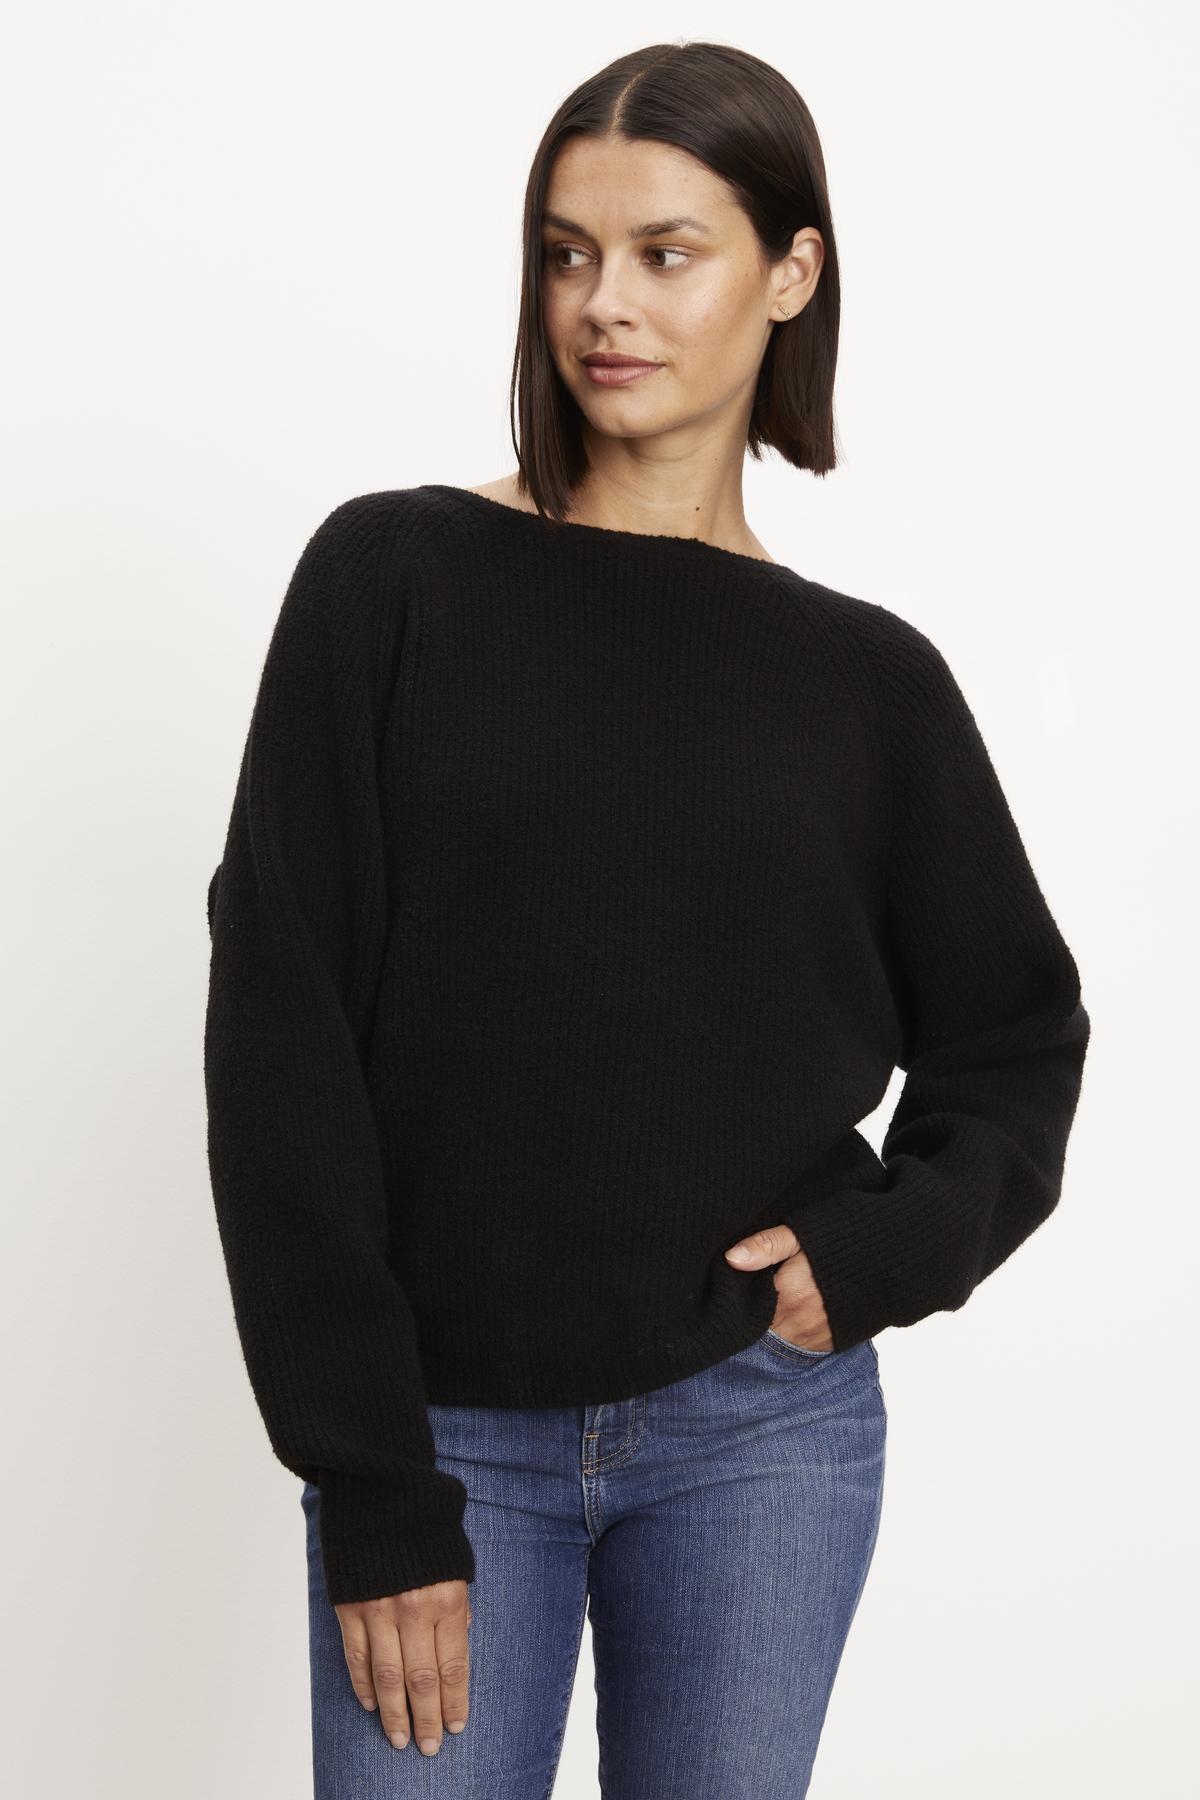   A model wearing a black Velvet by Graham & Spencer Caitlyn Boucle Raglan Sweater and jeans. 